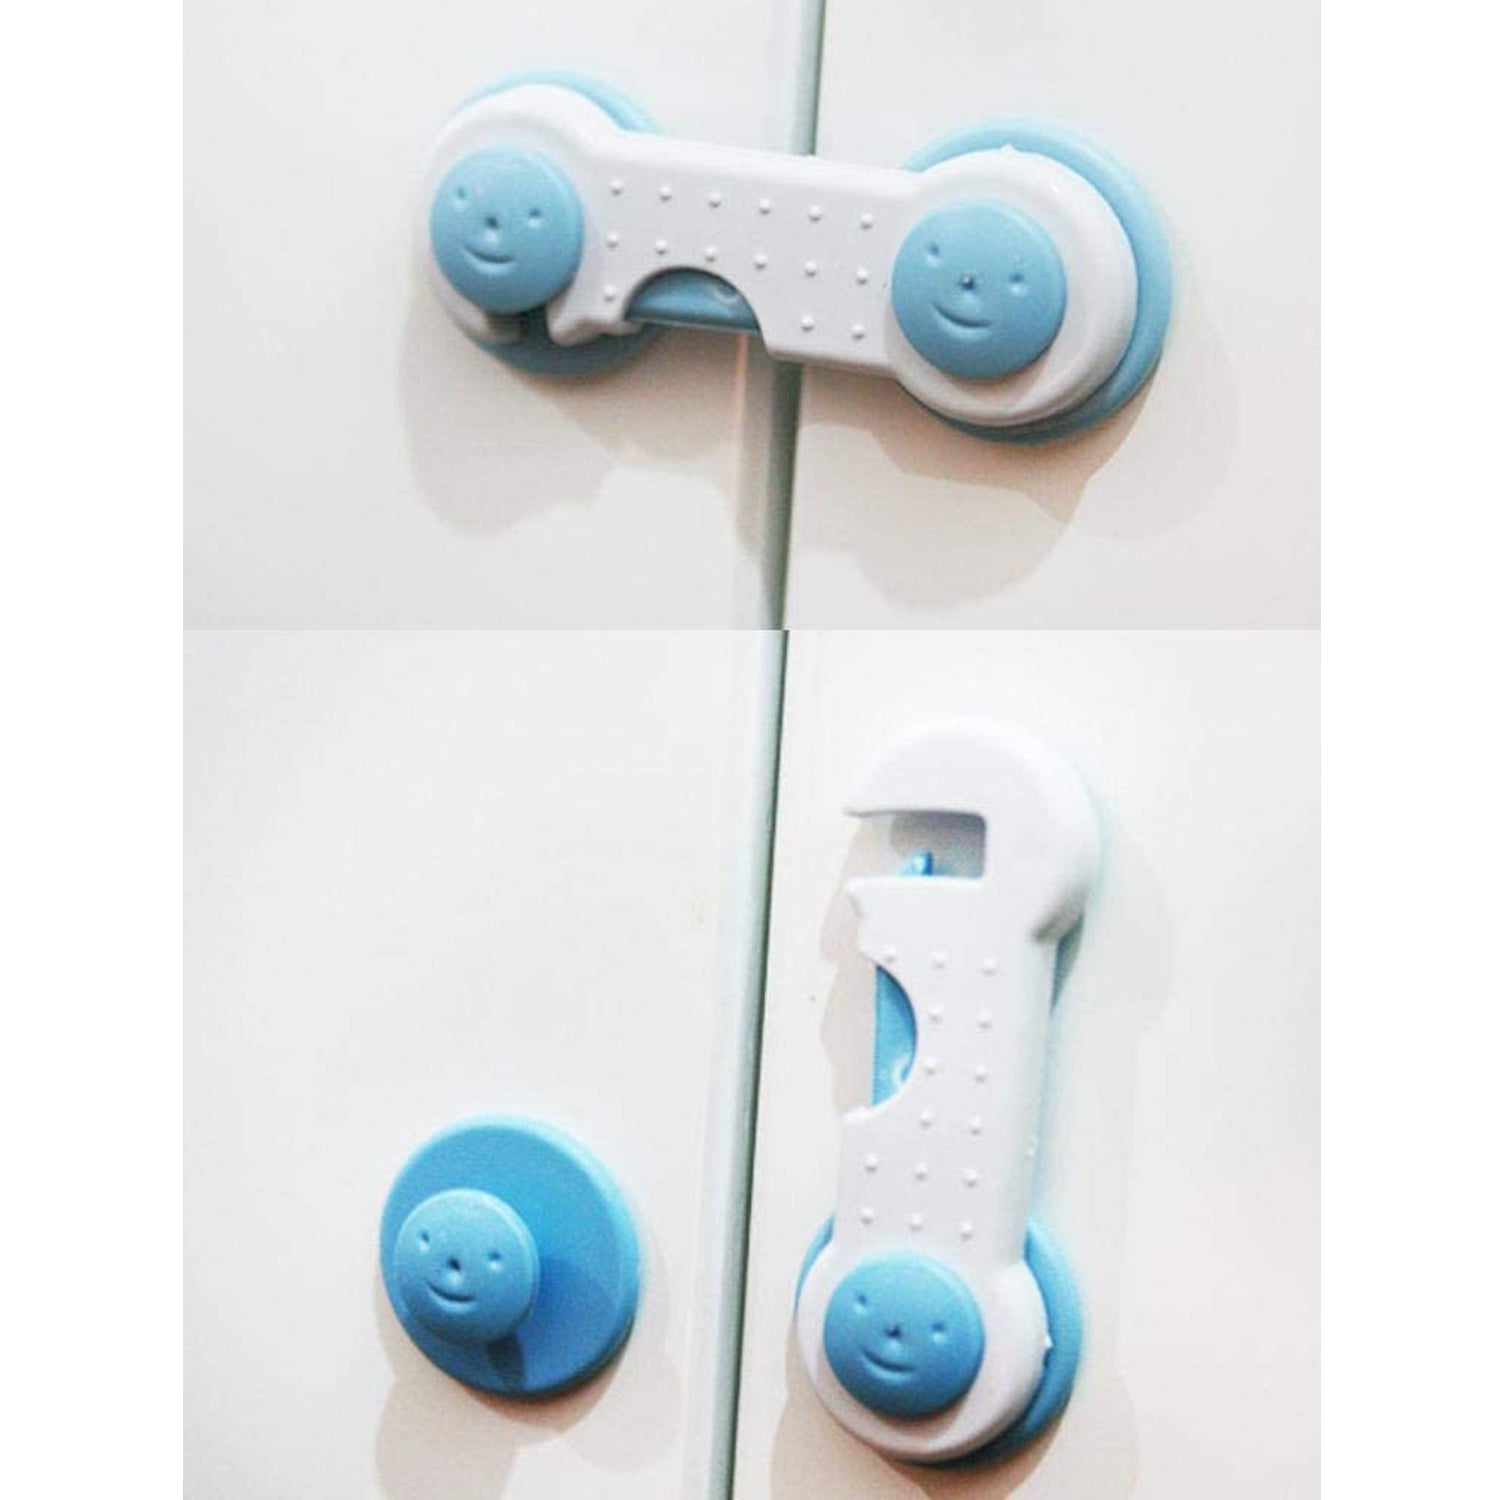 4688A Child Safety lock Child Toddler Baby Safety Locks Proofing for Cabinet Toilet Seat Fridge Door Drawers ( 1 pc) JK Trends